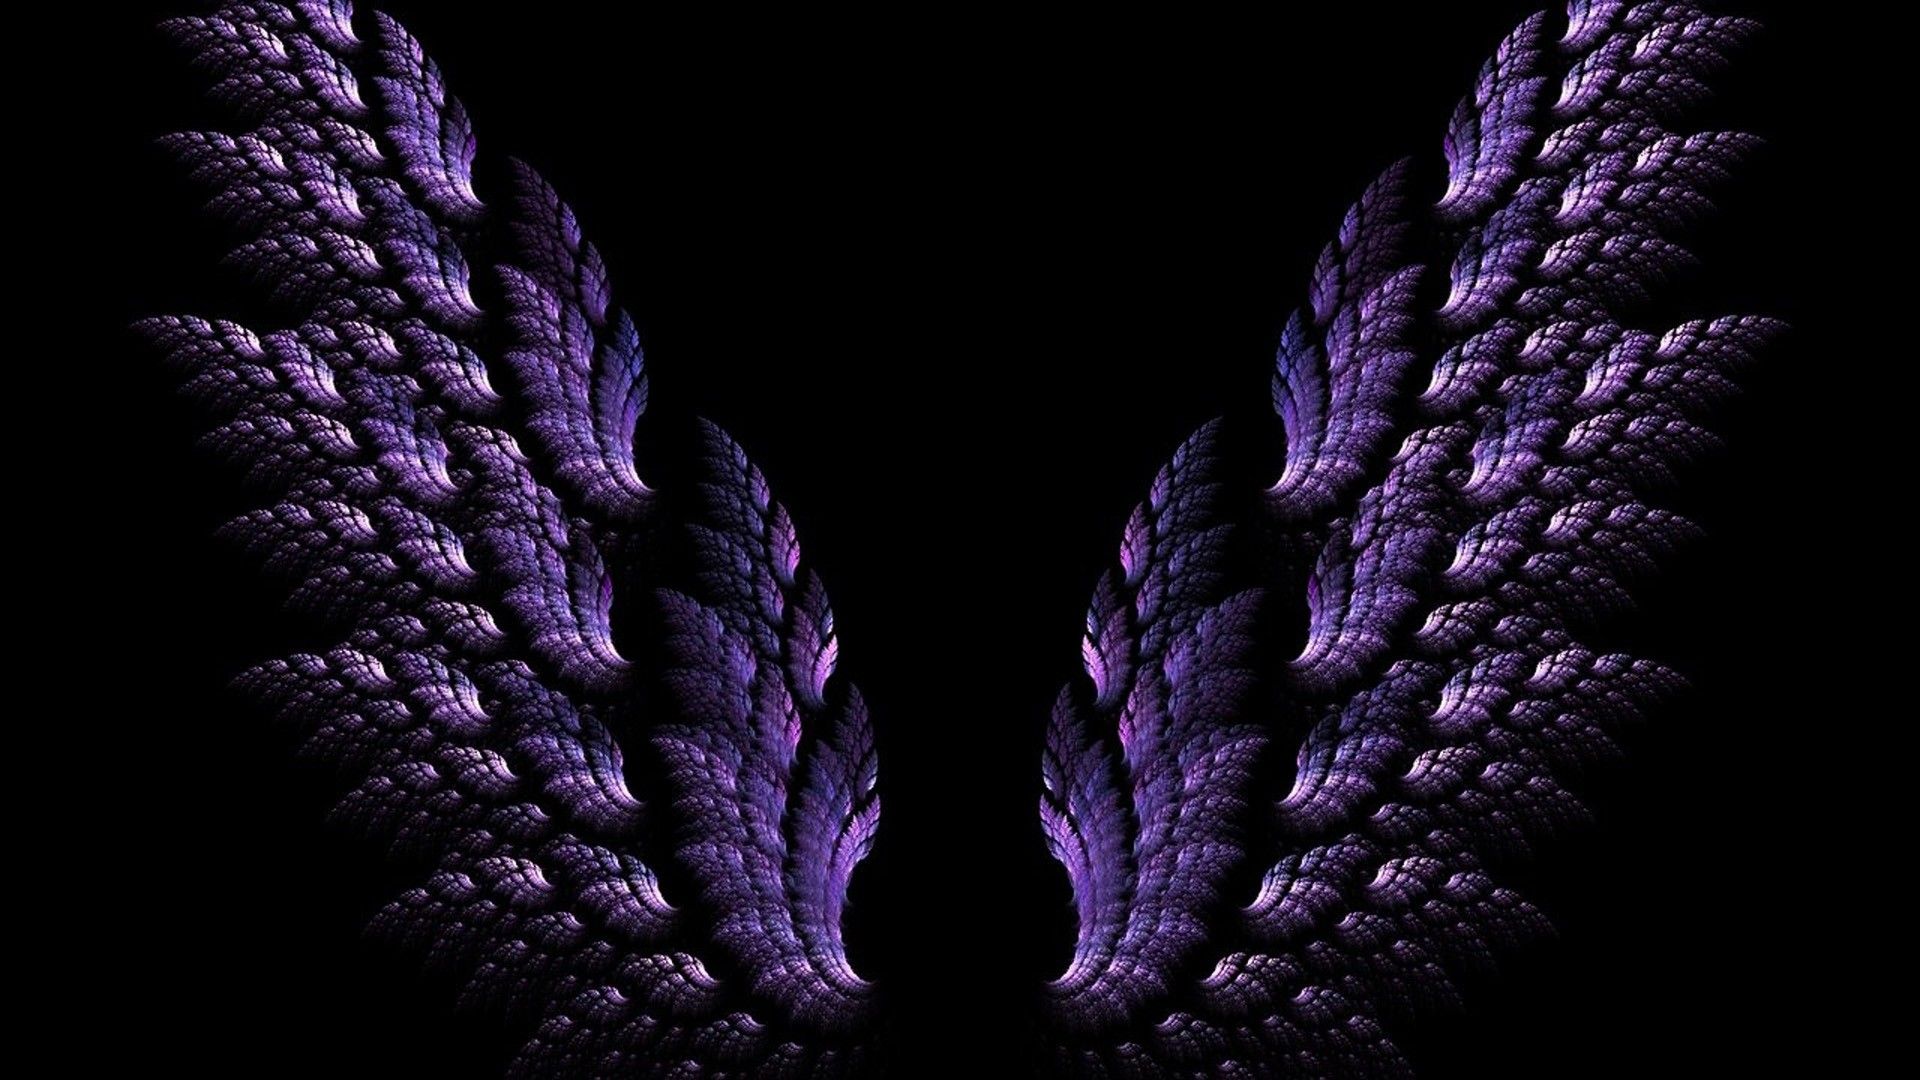 Two purple wings on a black background - Wings